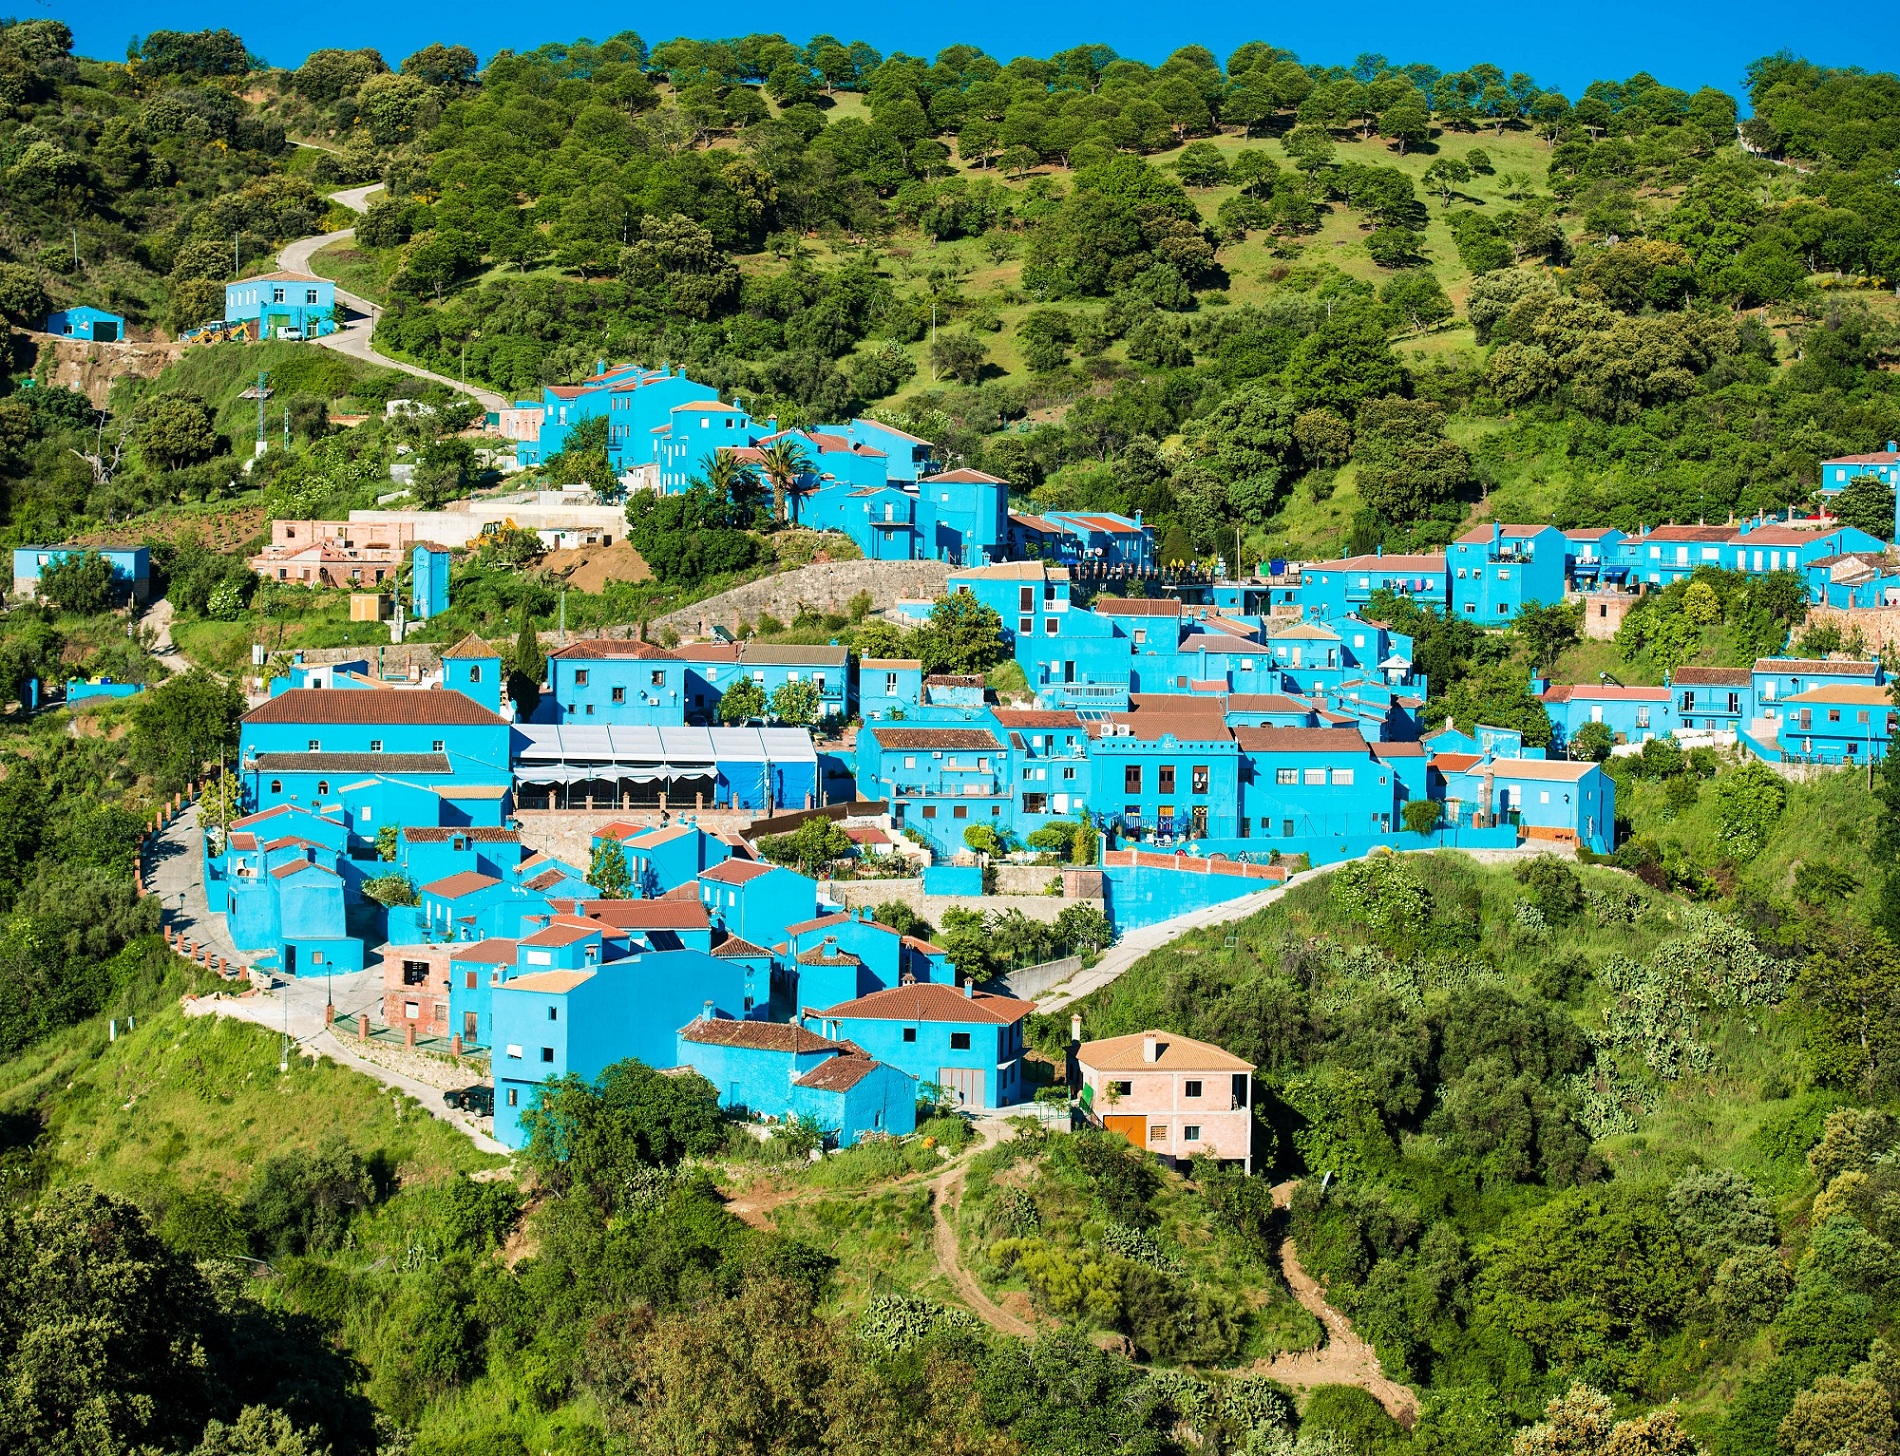 Juzcar, a village with blue buildings in Andalusia Malaga